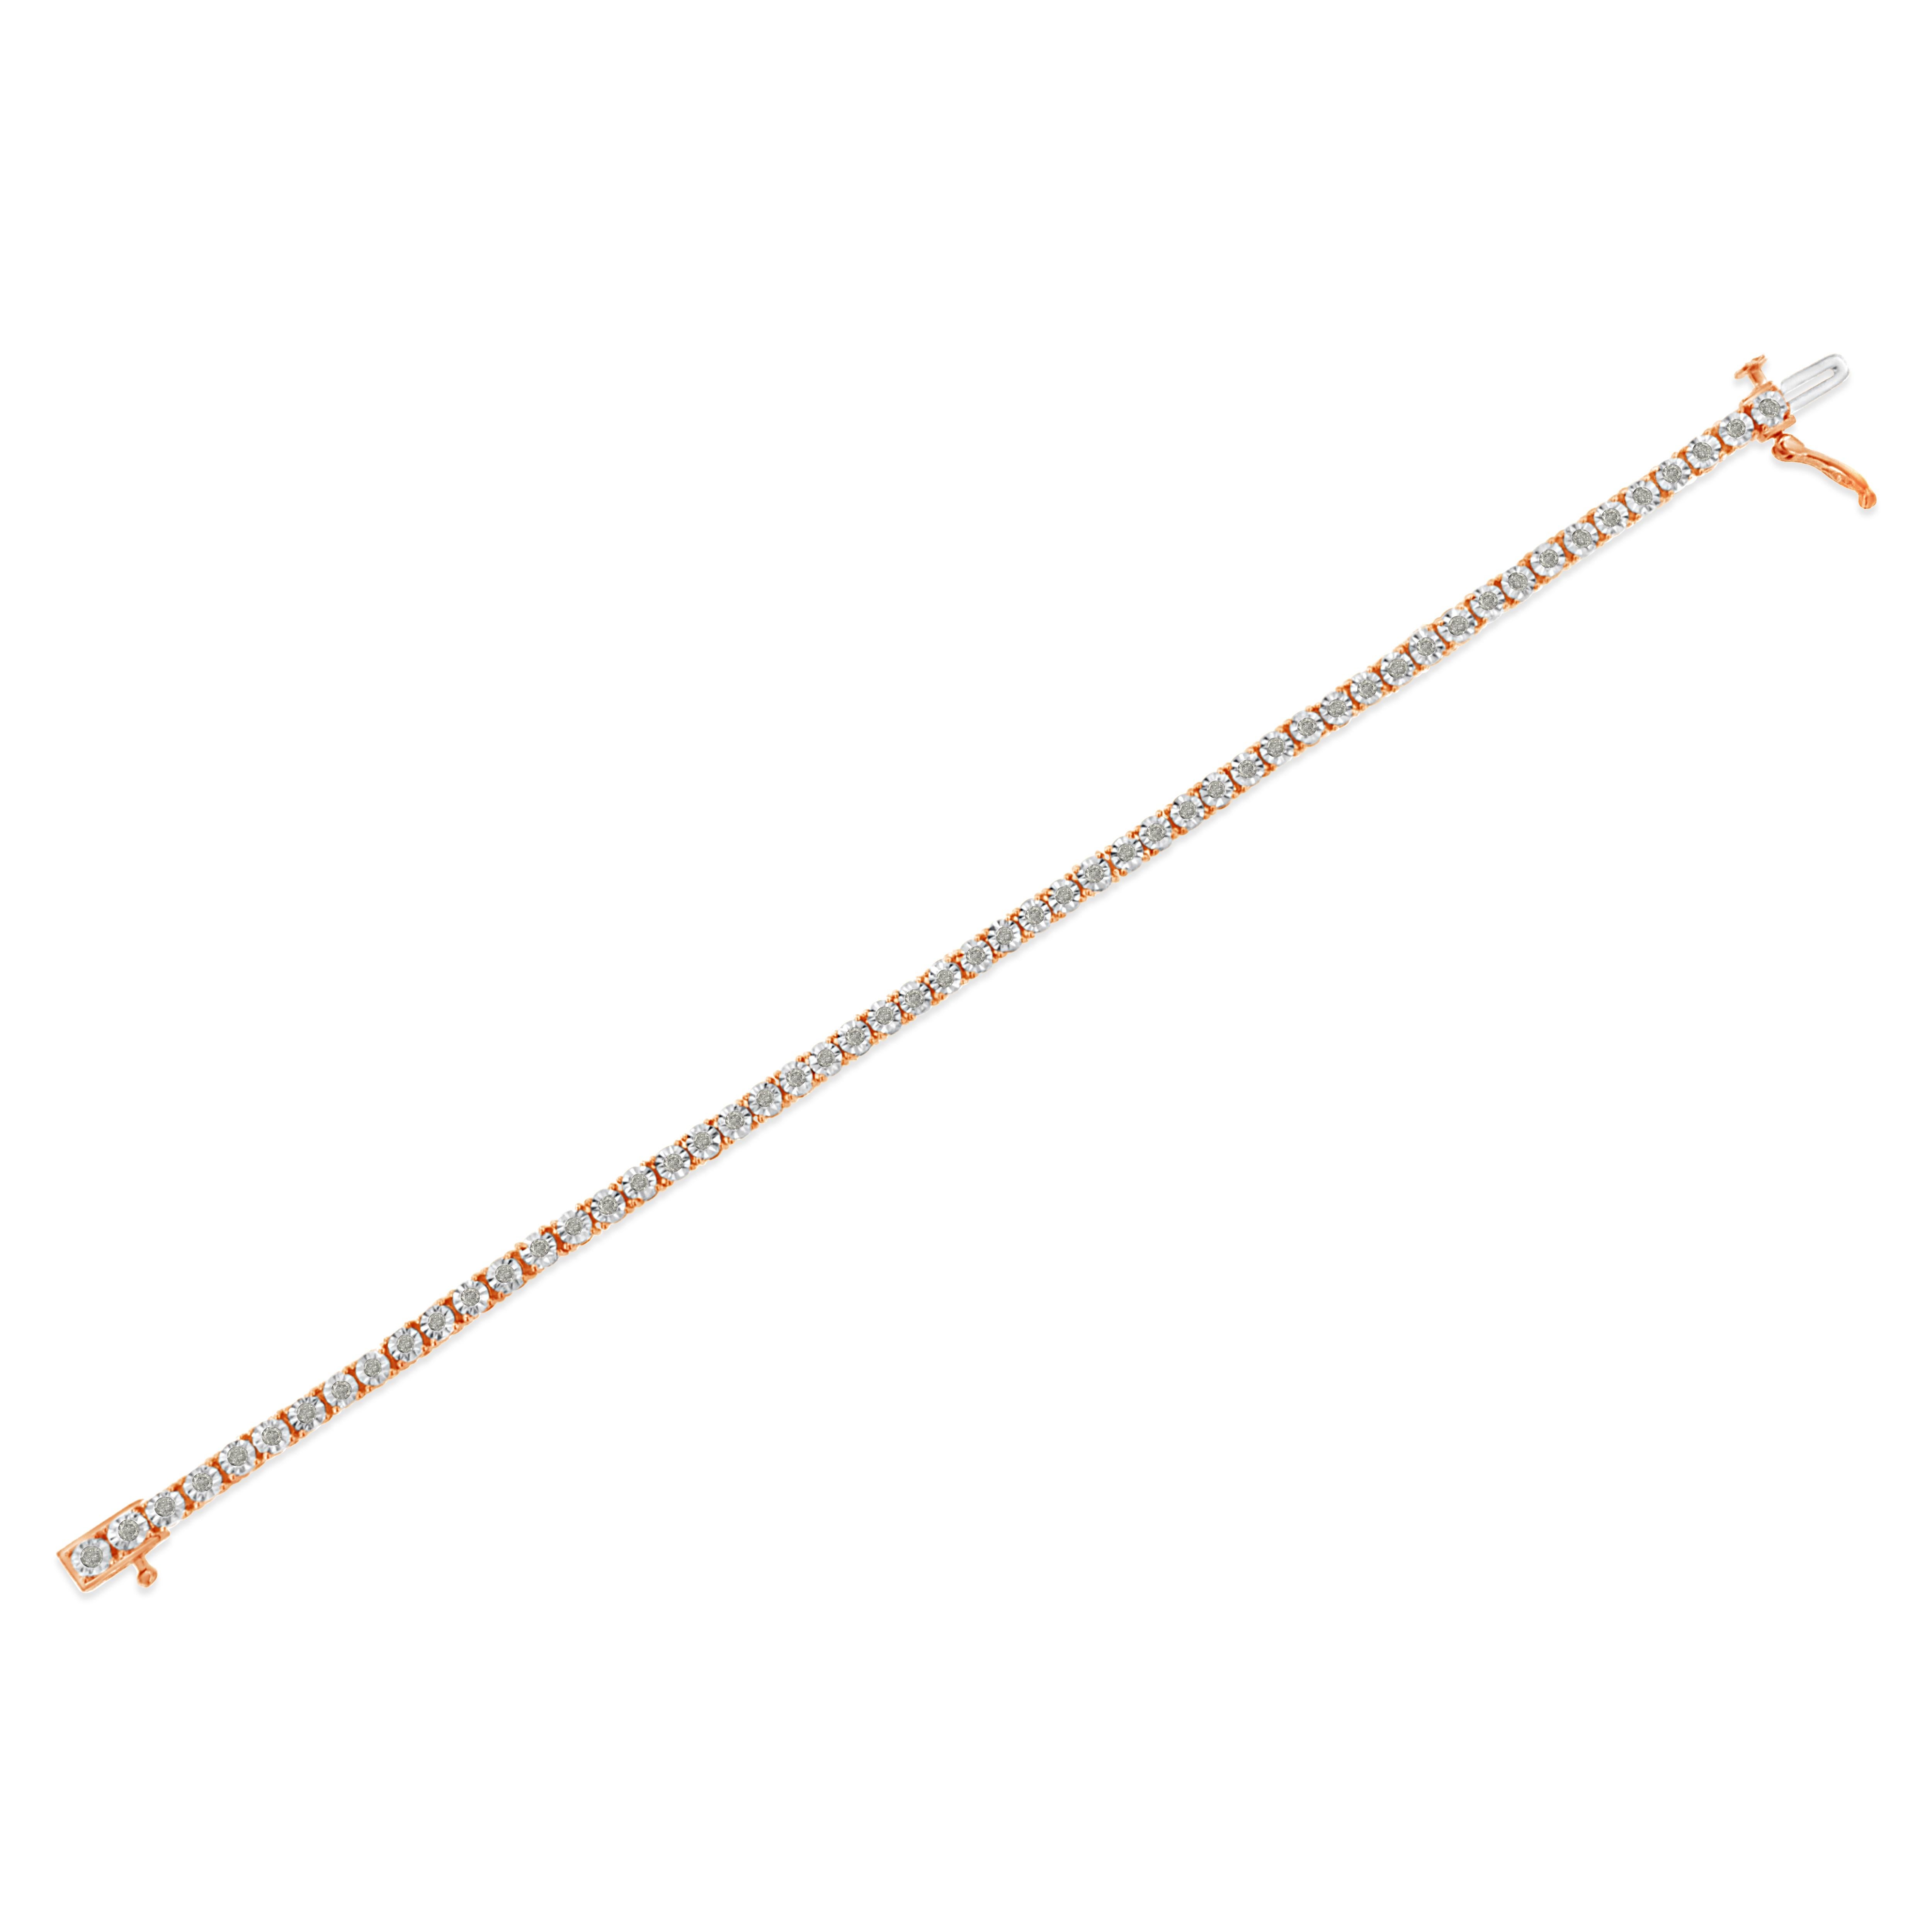 Women's Rose Gold Plated Sterling Silver 1.0 Carat Miracle-Set Diamond Tennis Bracelet For Sale